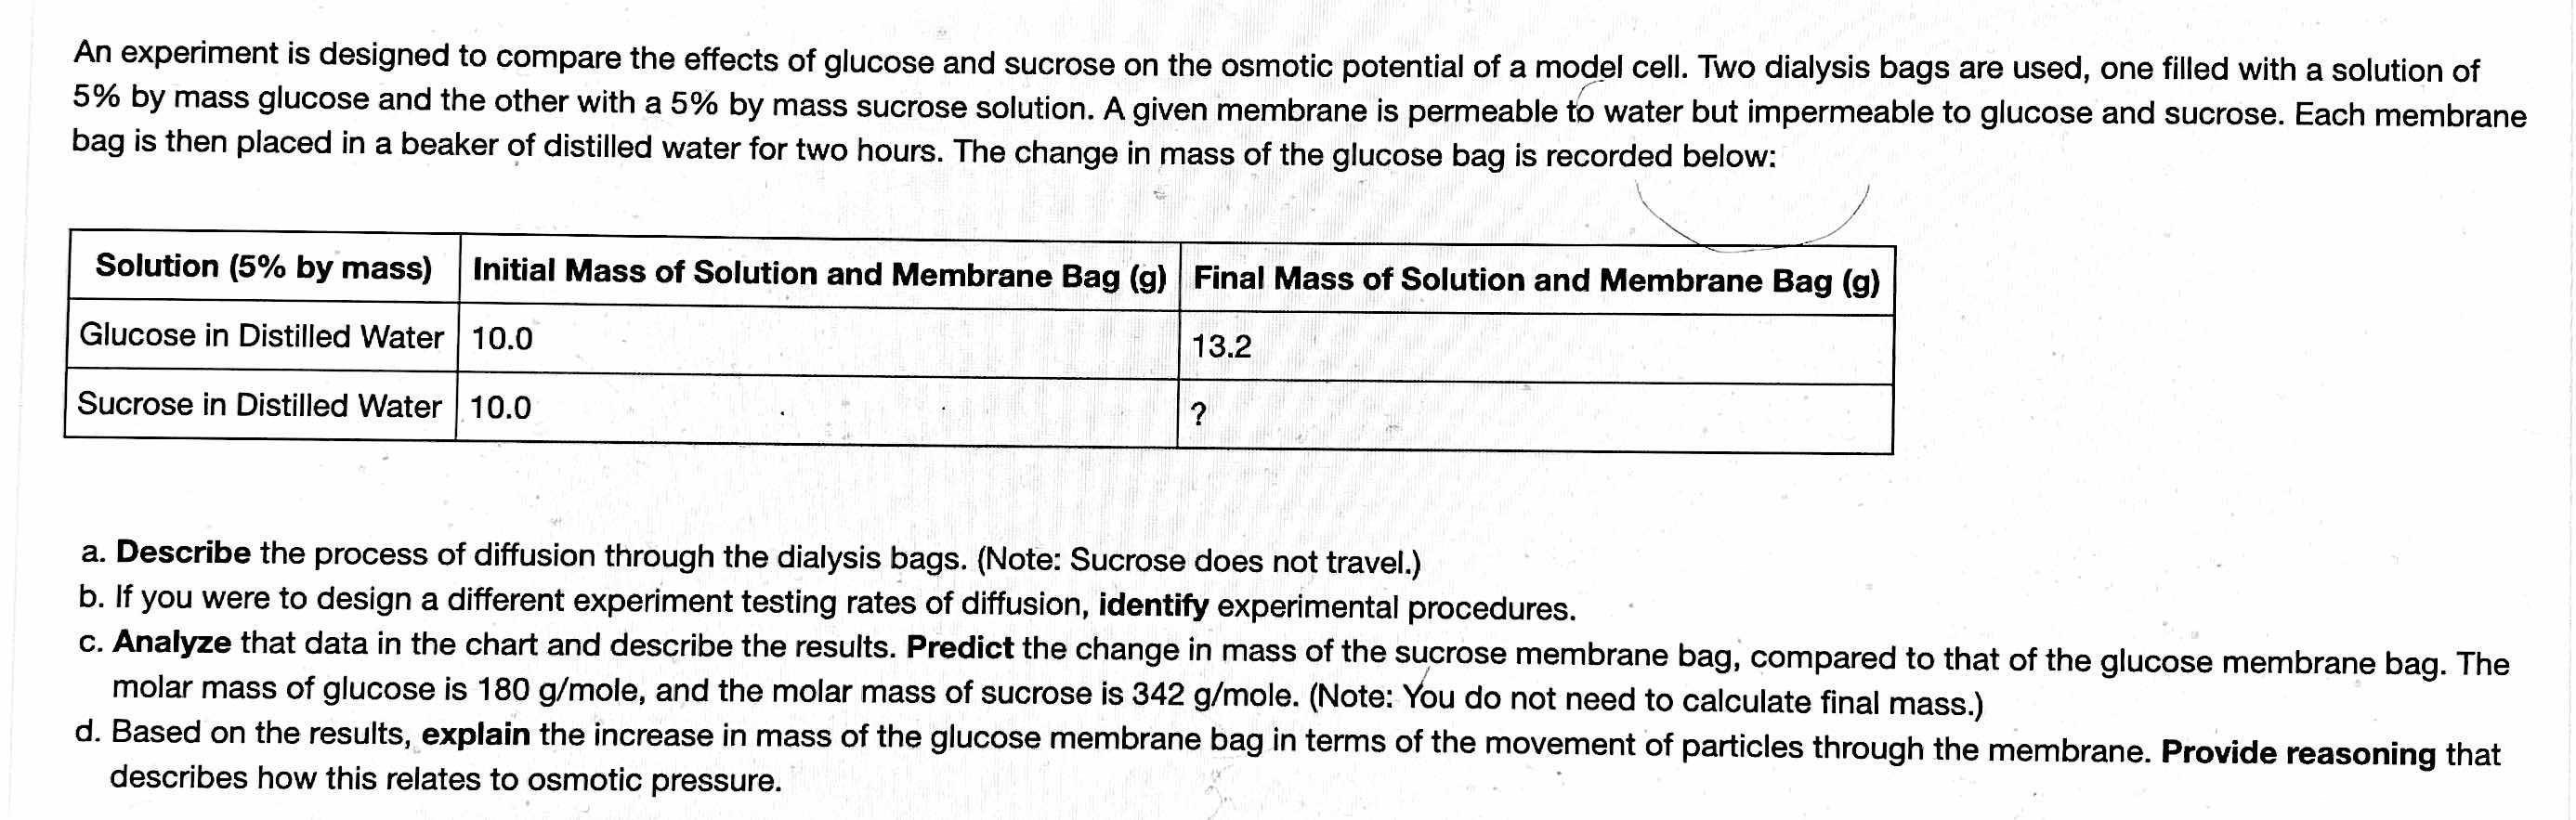 An experiment is designed to compare the effects of glucose and sucrose on the osmotic potential of a model cell. Two dialysi